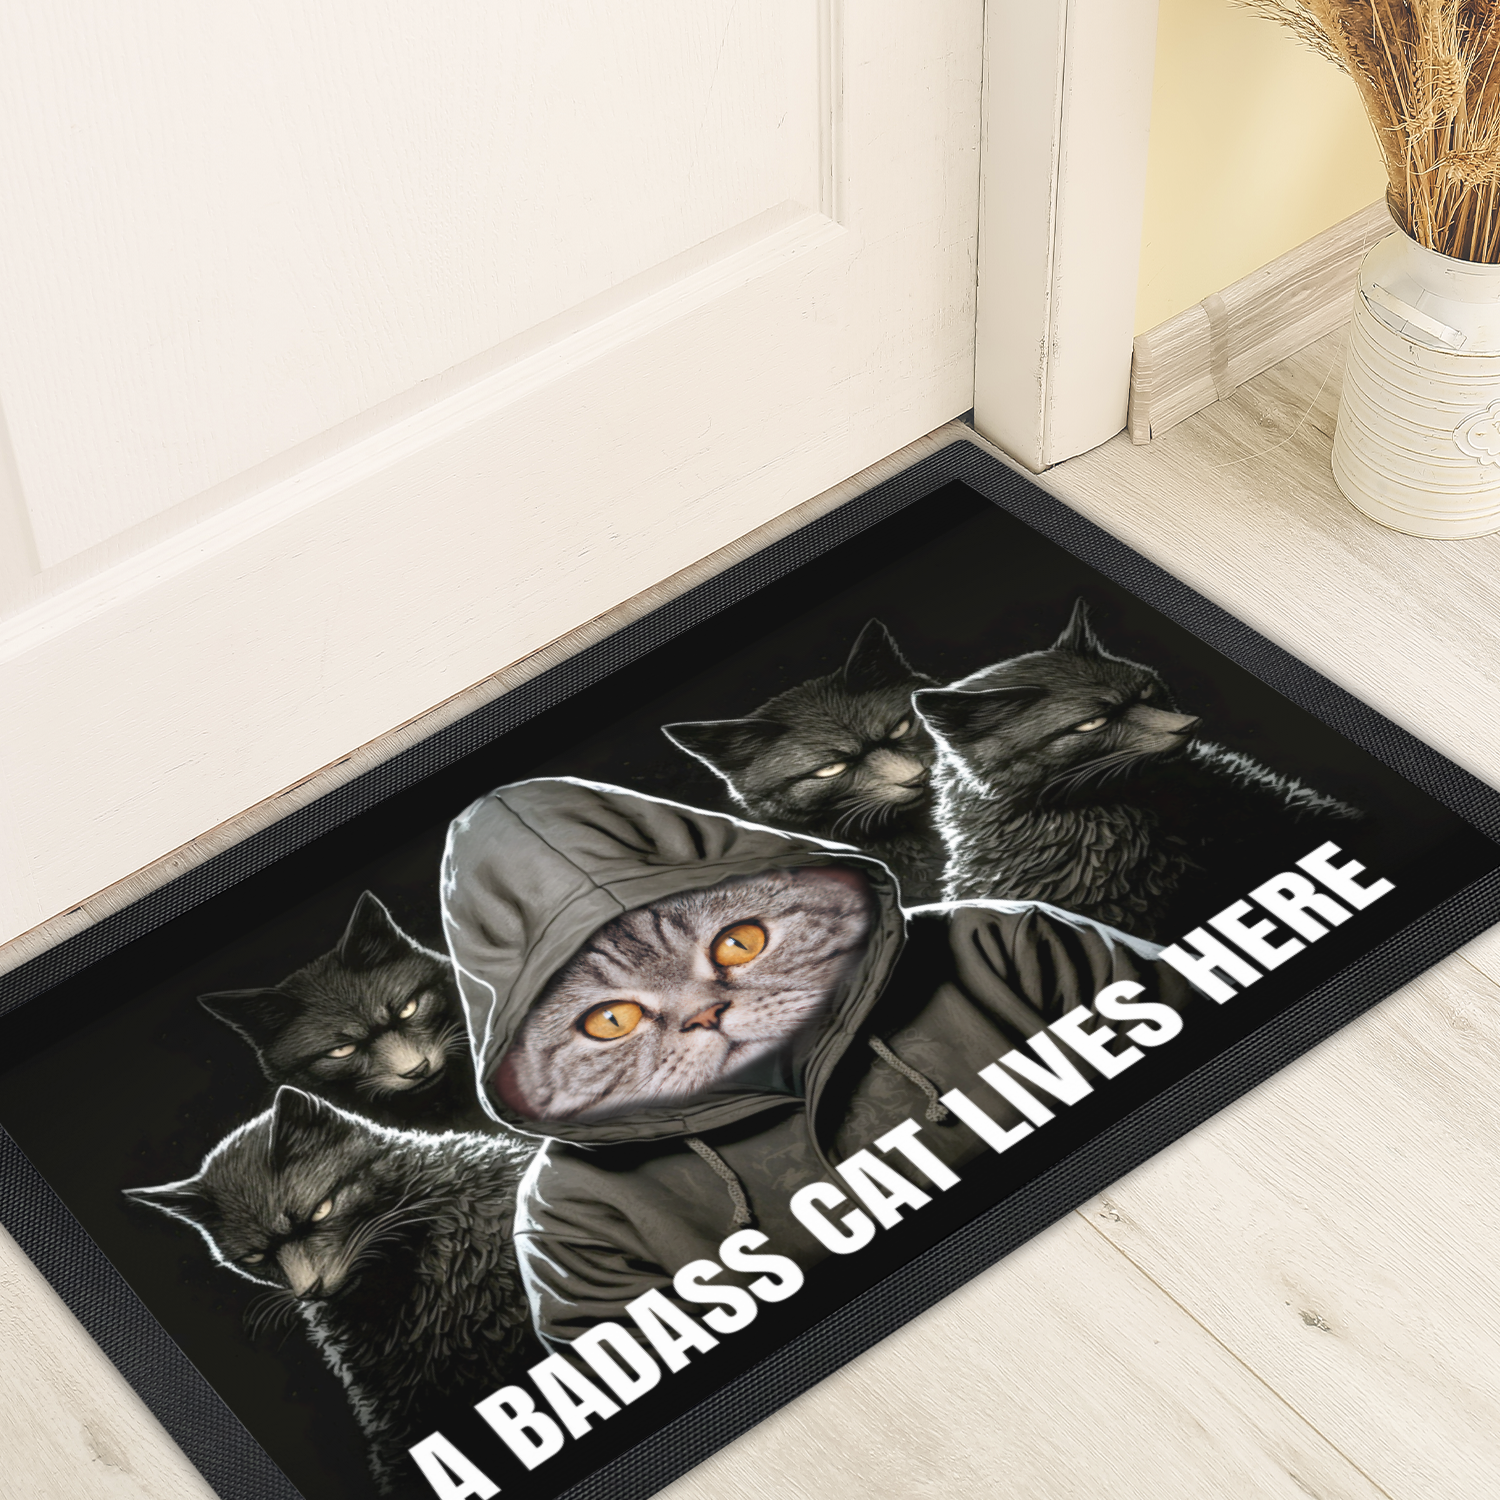 Personalized Doormat - Personalized Doormat - A Badass Cat Lives Here 